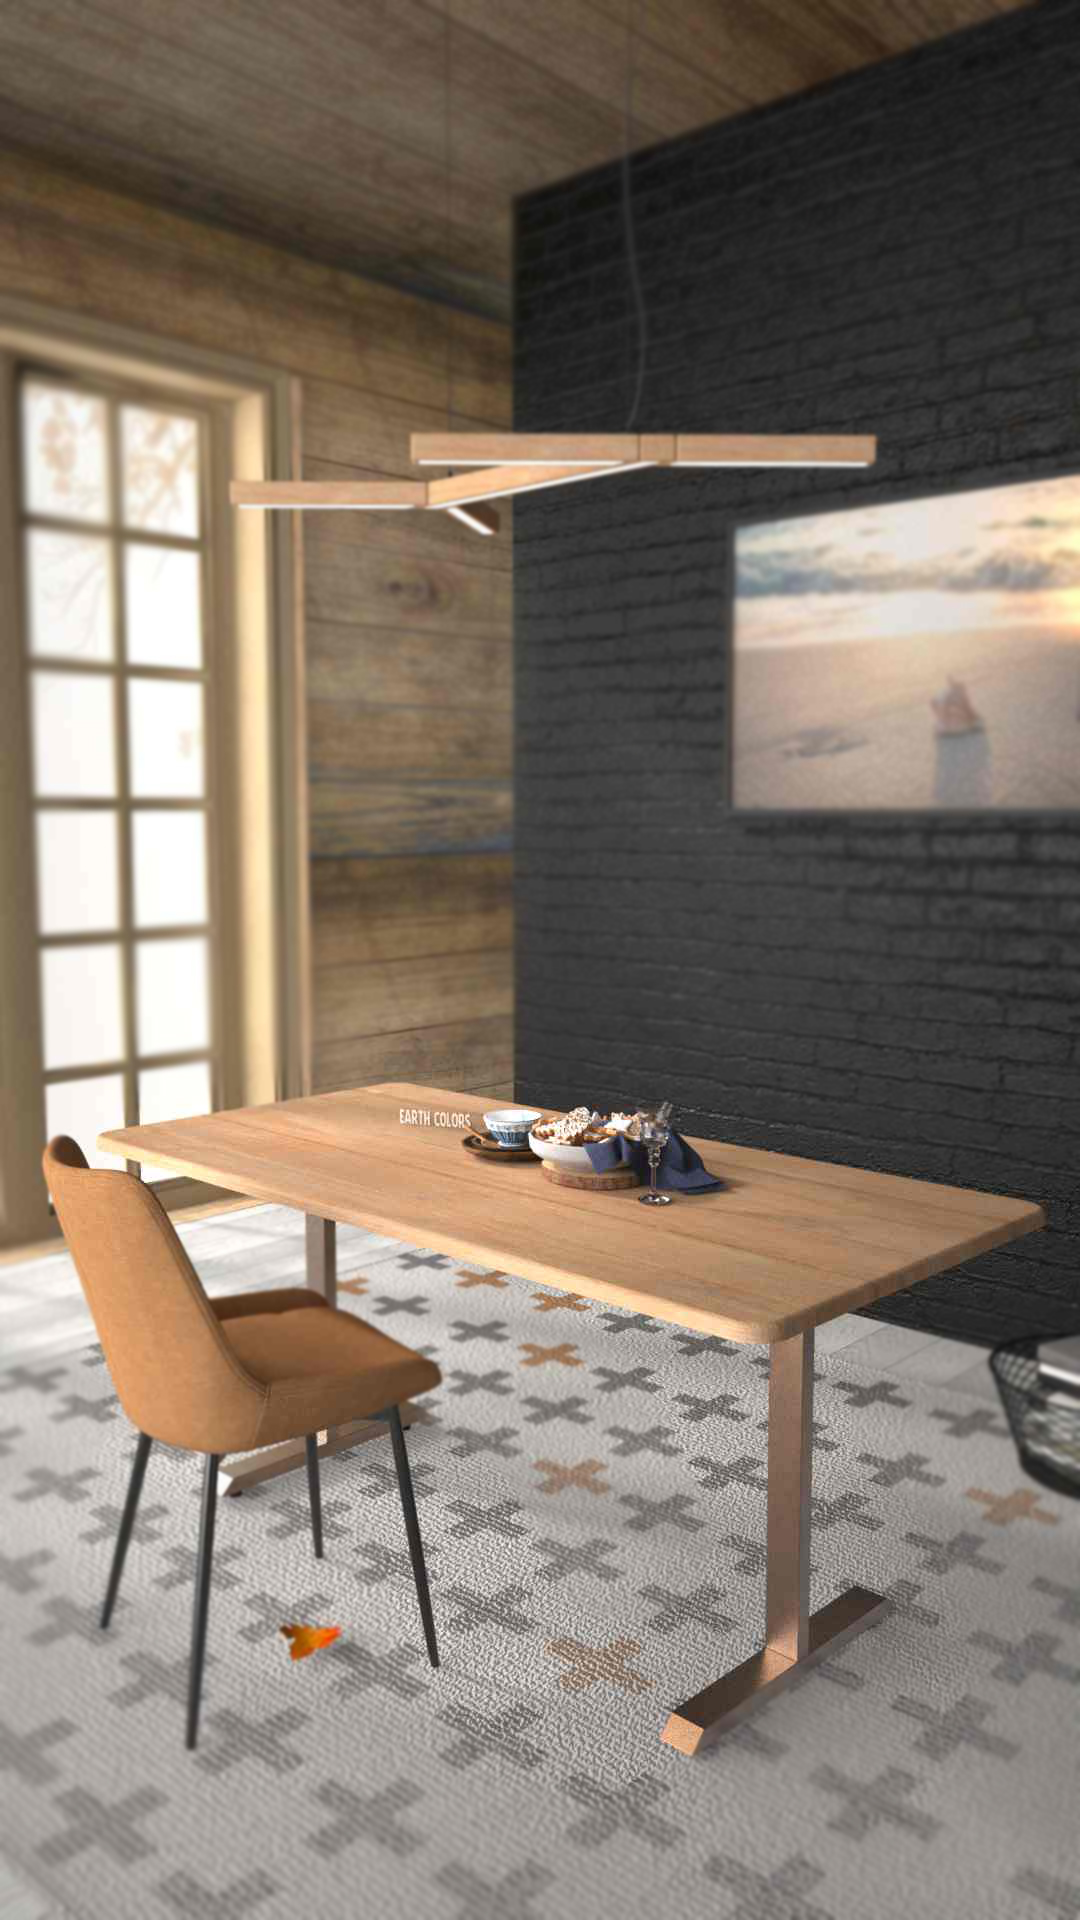 Gable live edge dining table